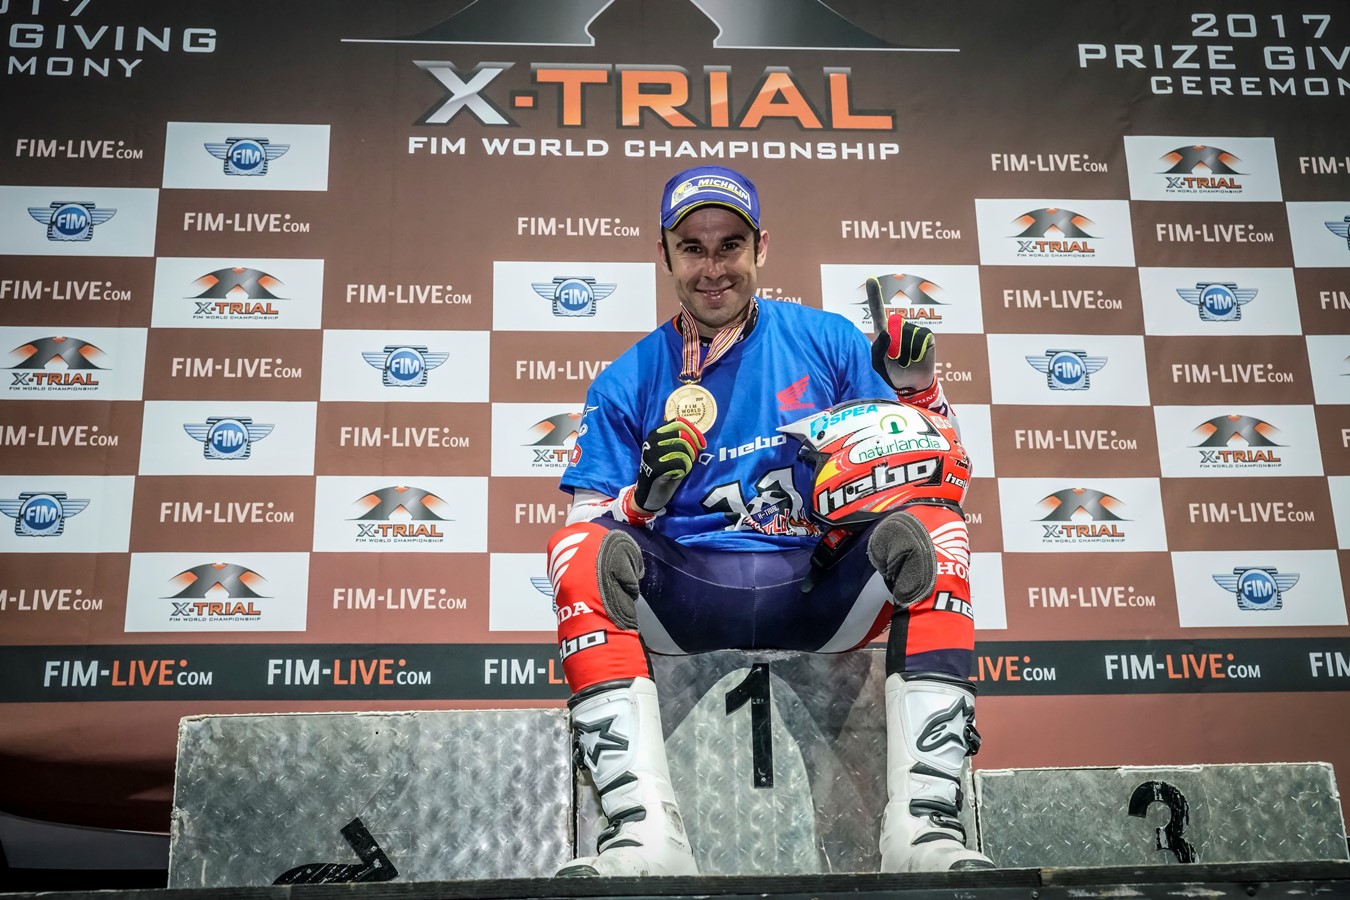 Bigger and bigger: Toni Bou increases his legendary status with an eleventh X-Trial Championship title